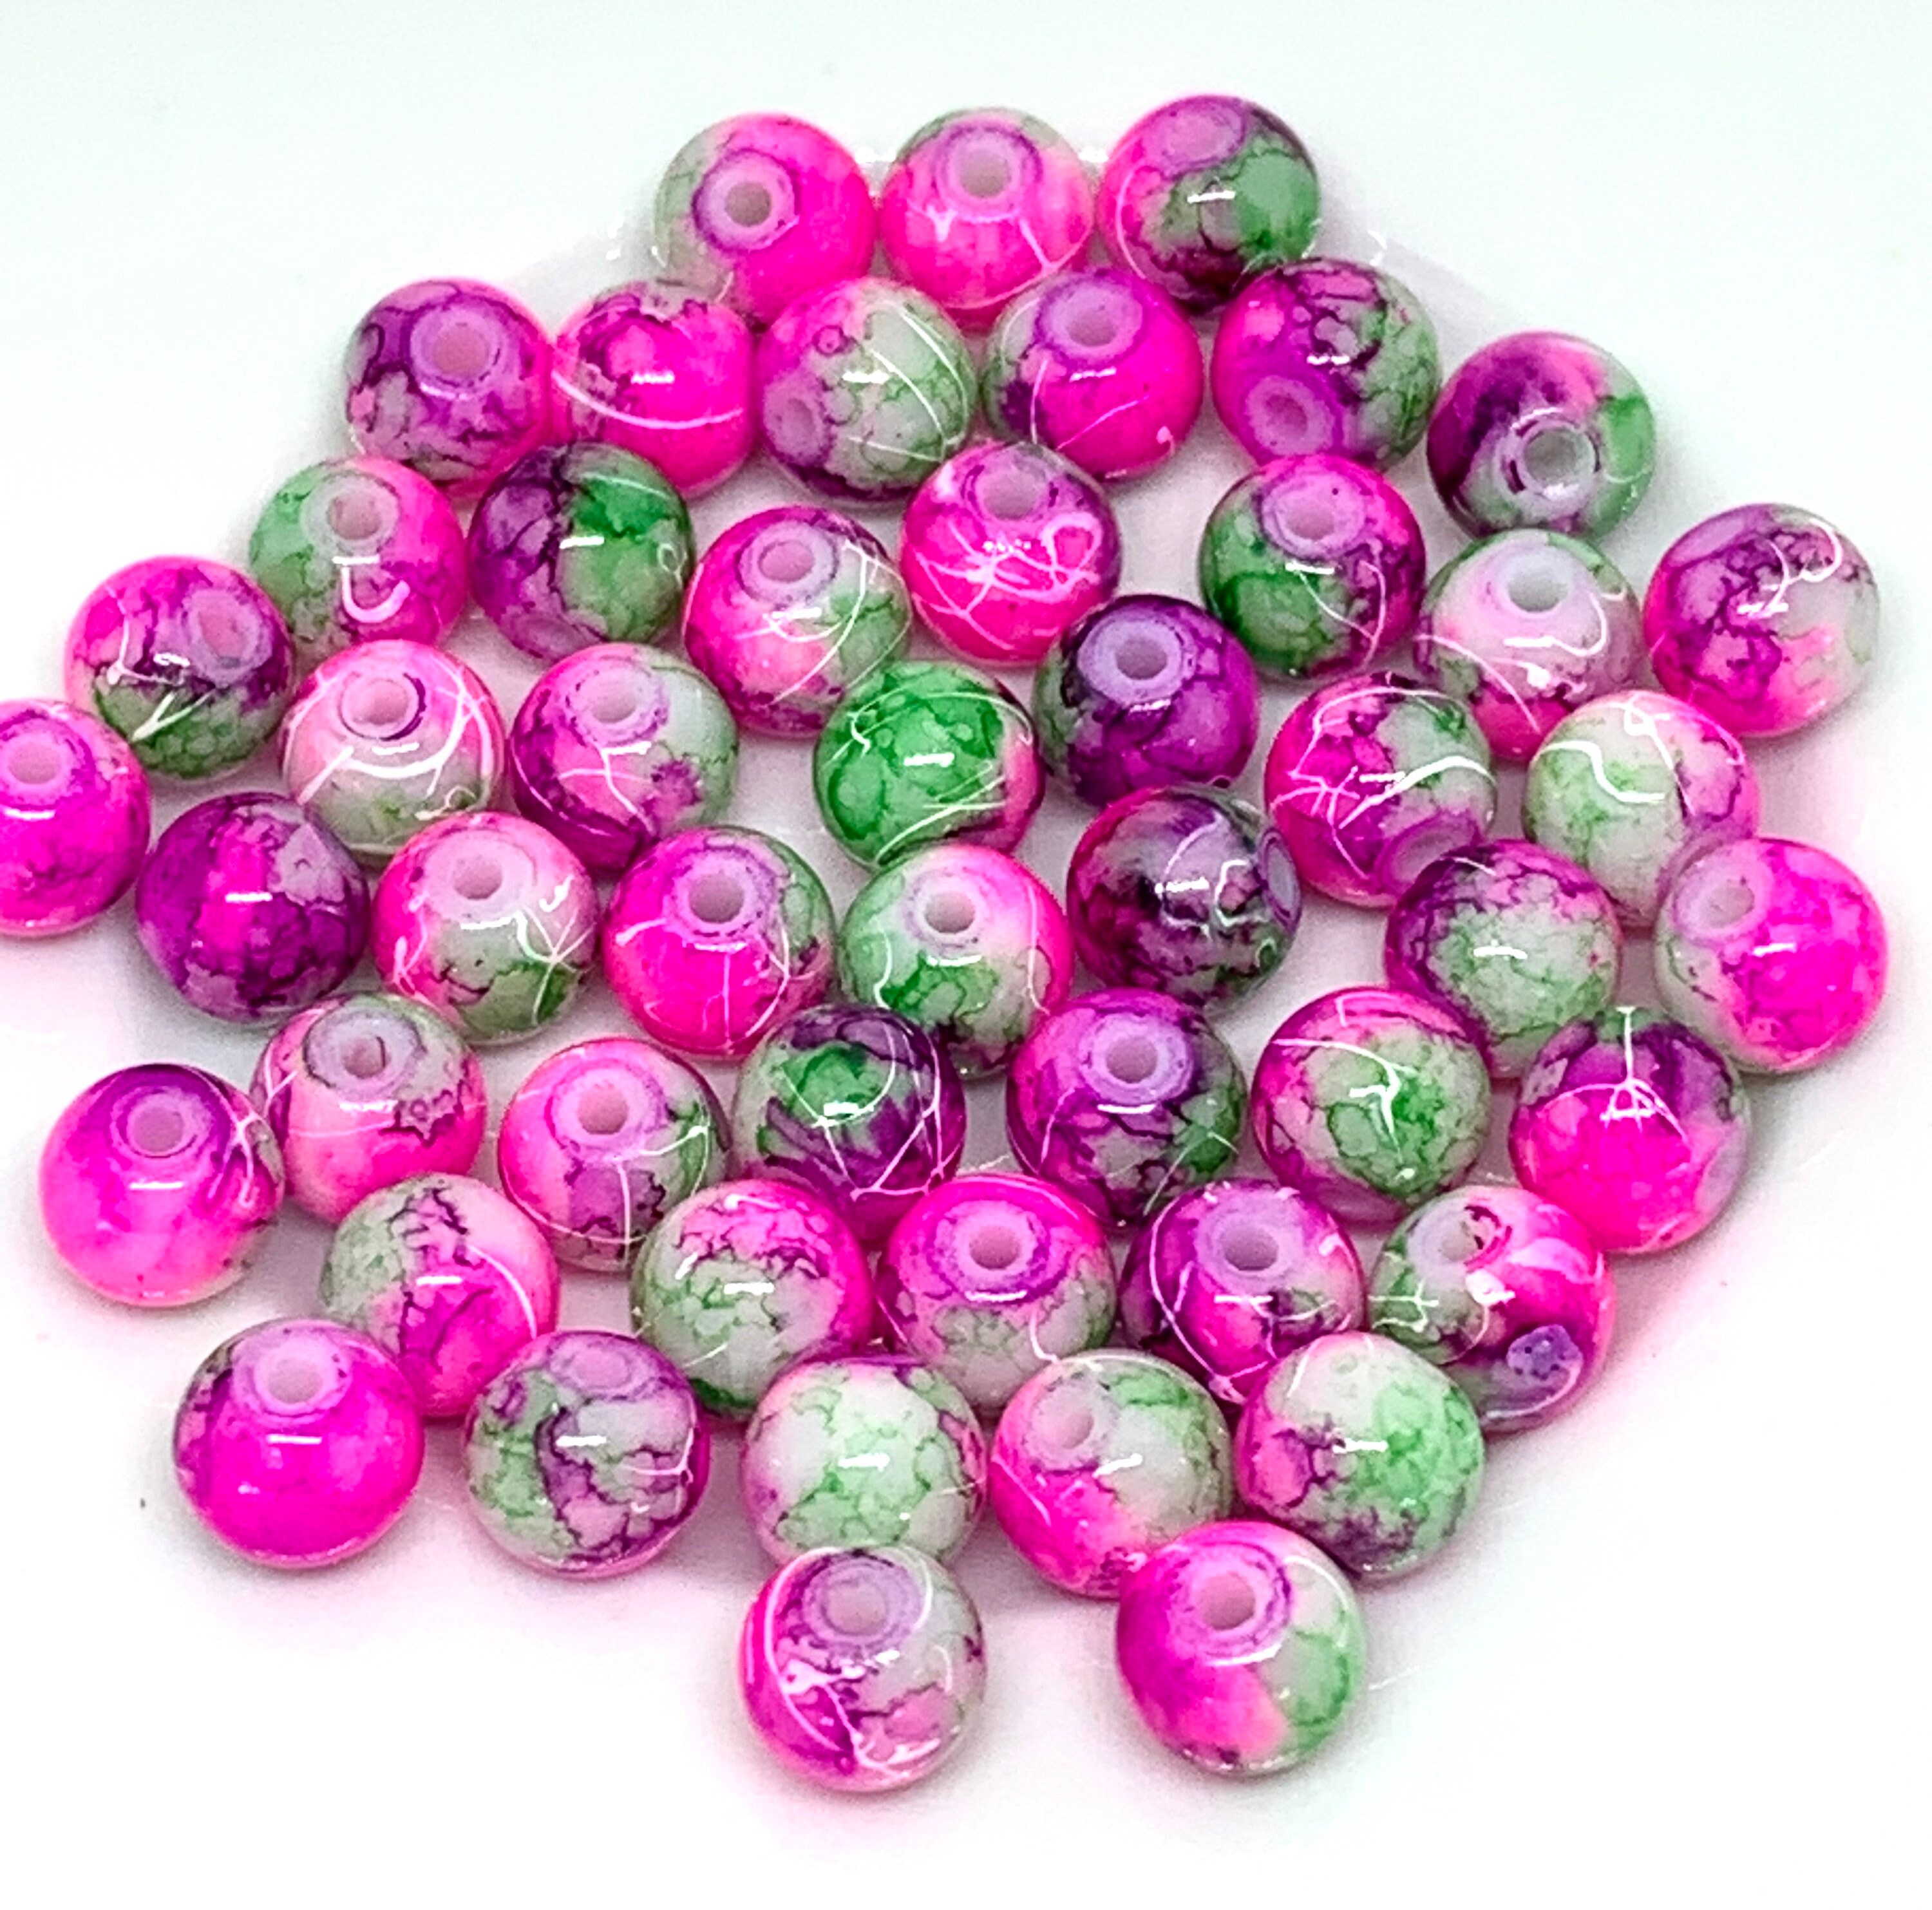 Rainbow Star Beads 8mm, Beads for Necklace, Round Beads, Colorful